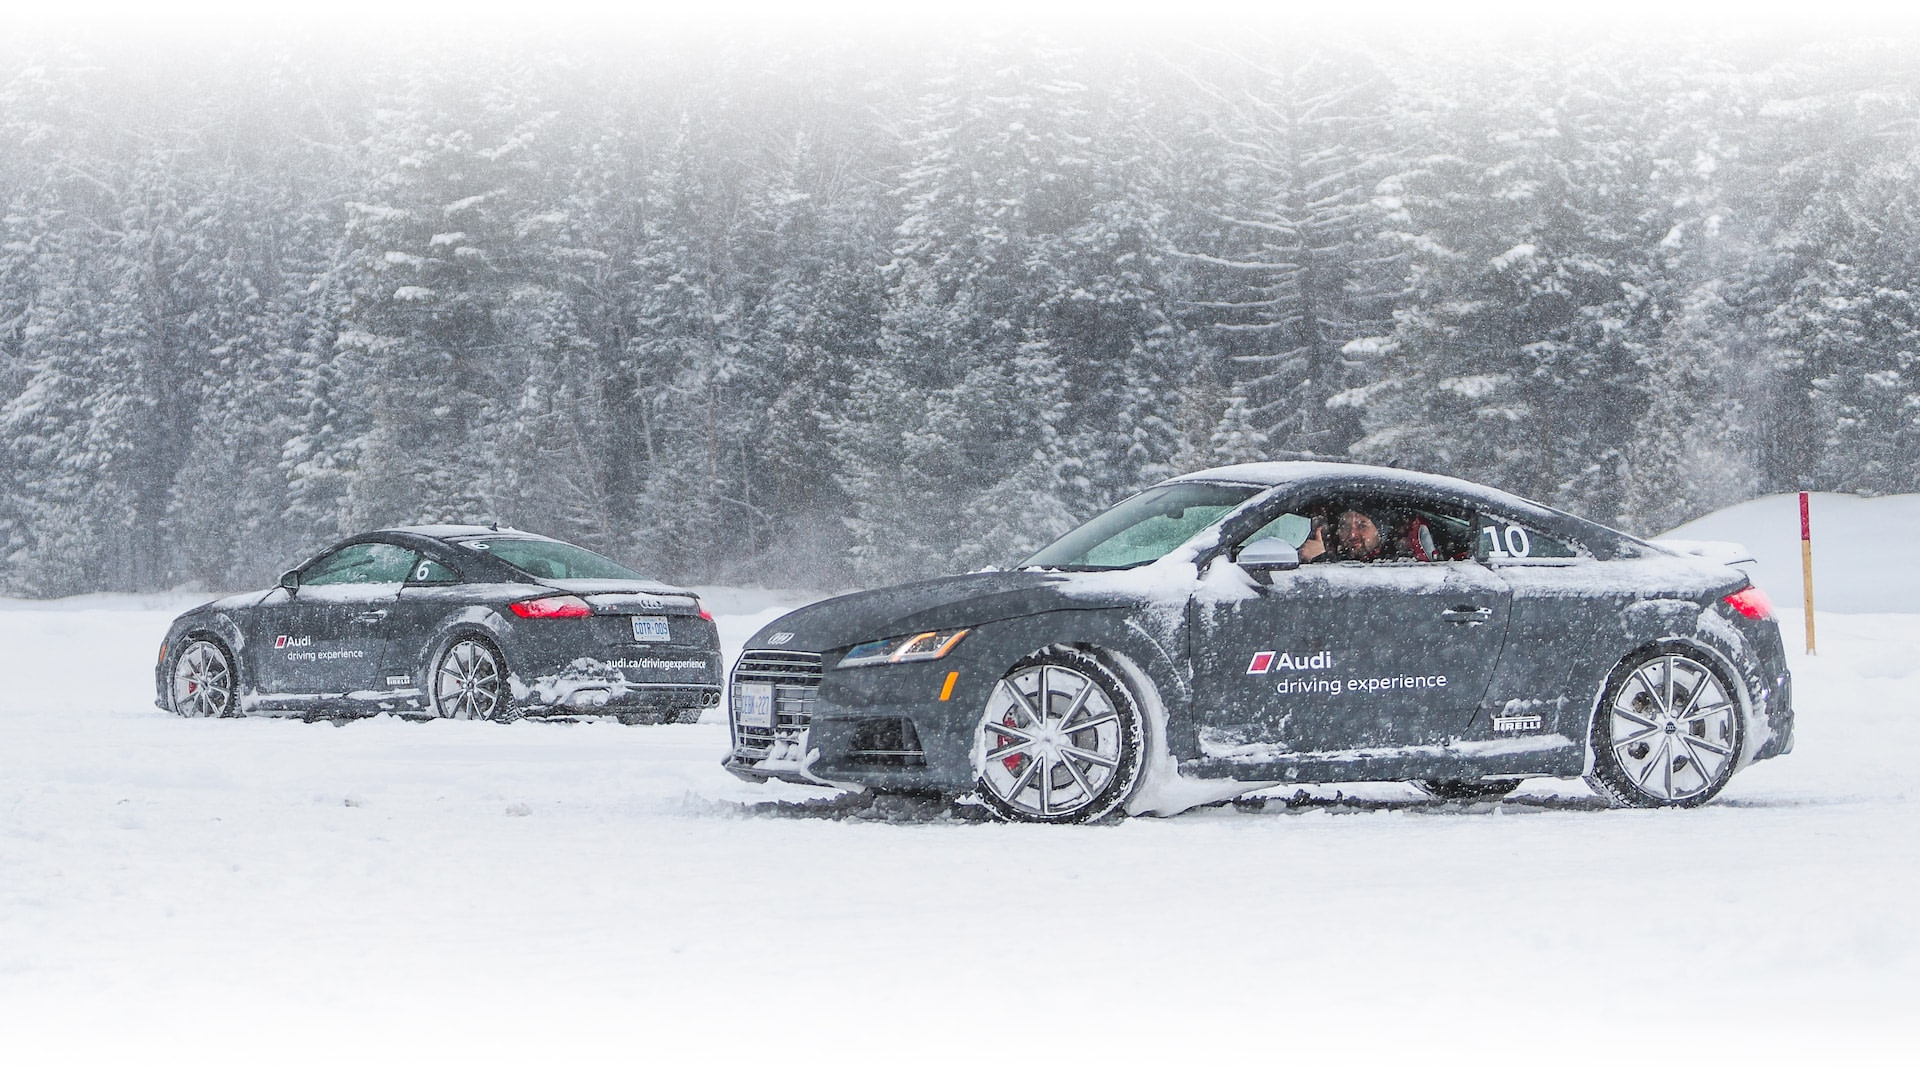 Max Parrot x Audi Ice Experience